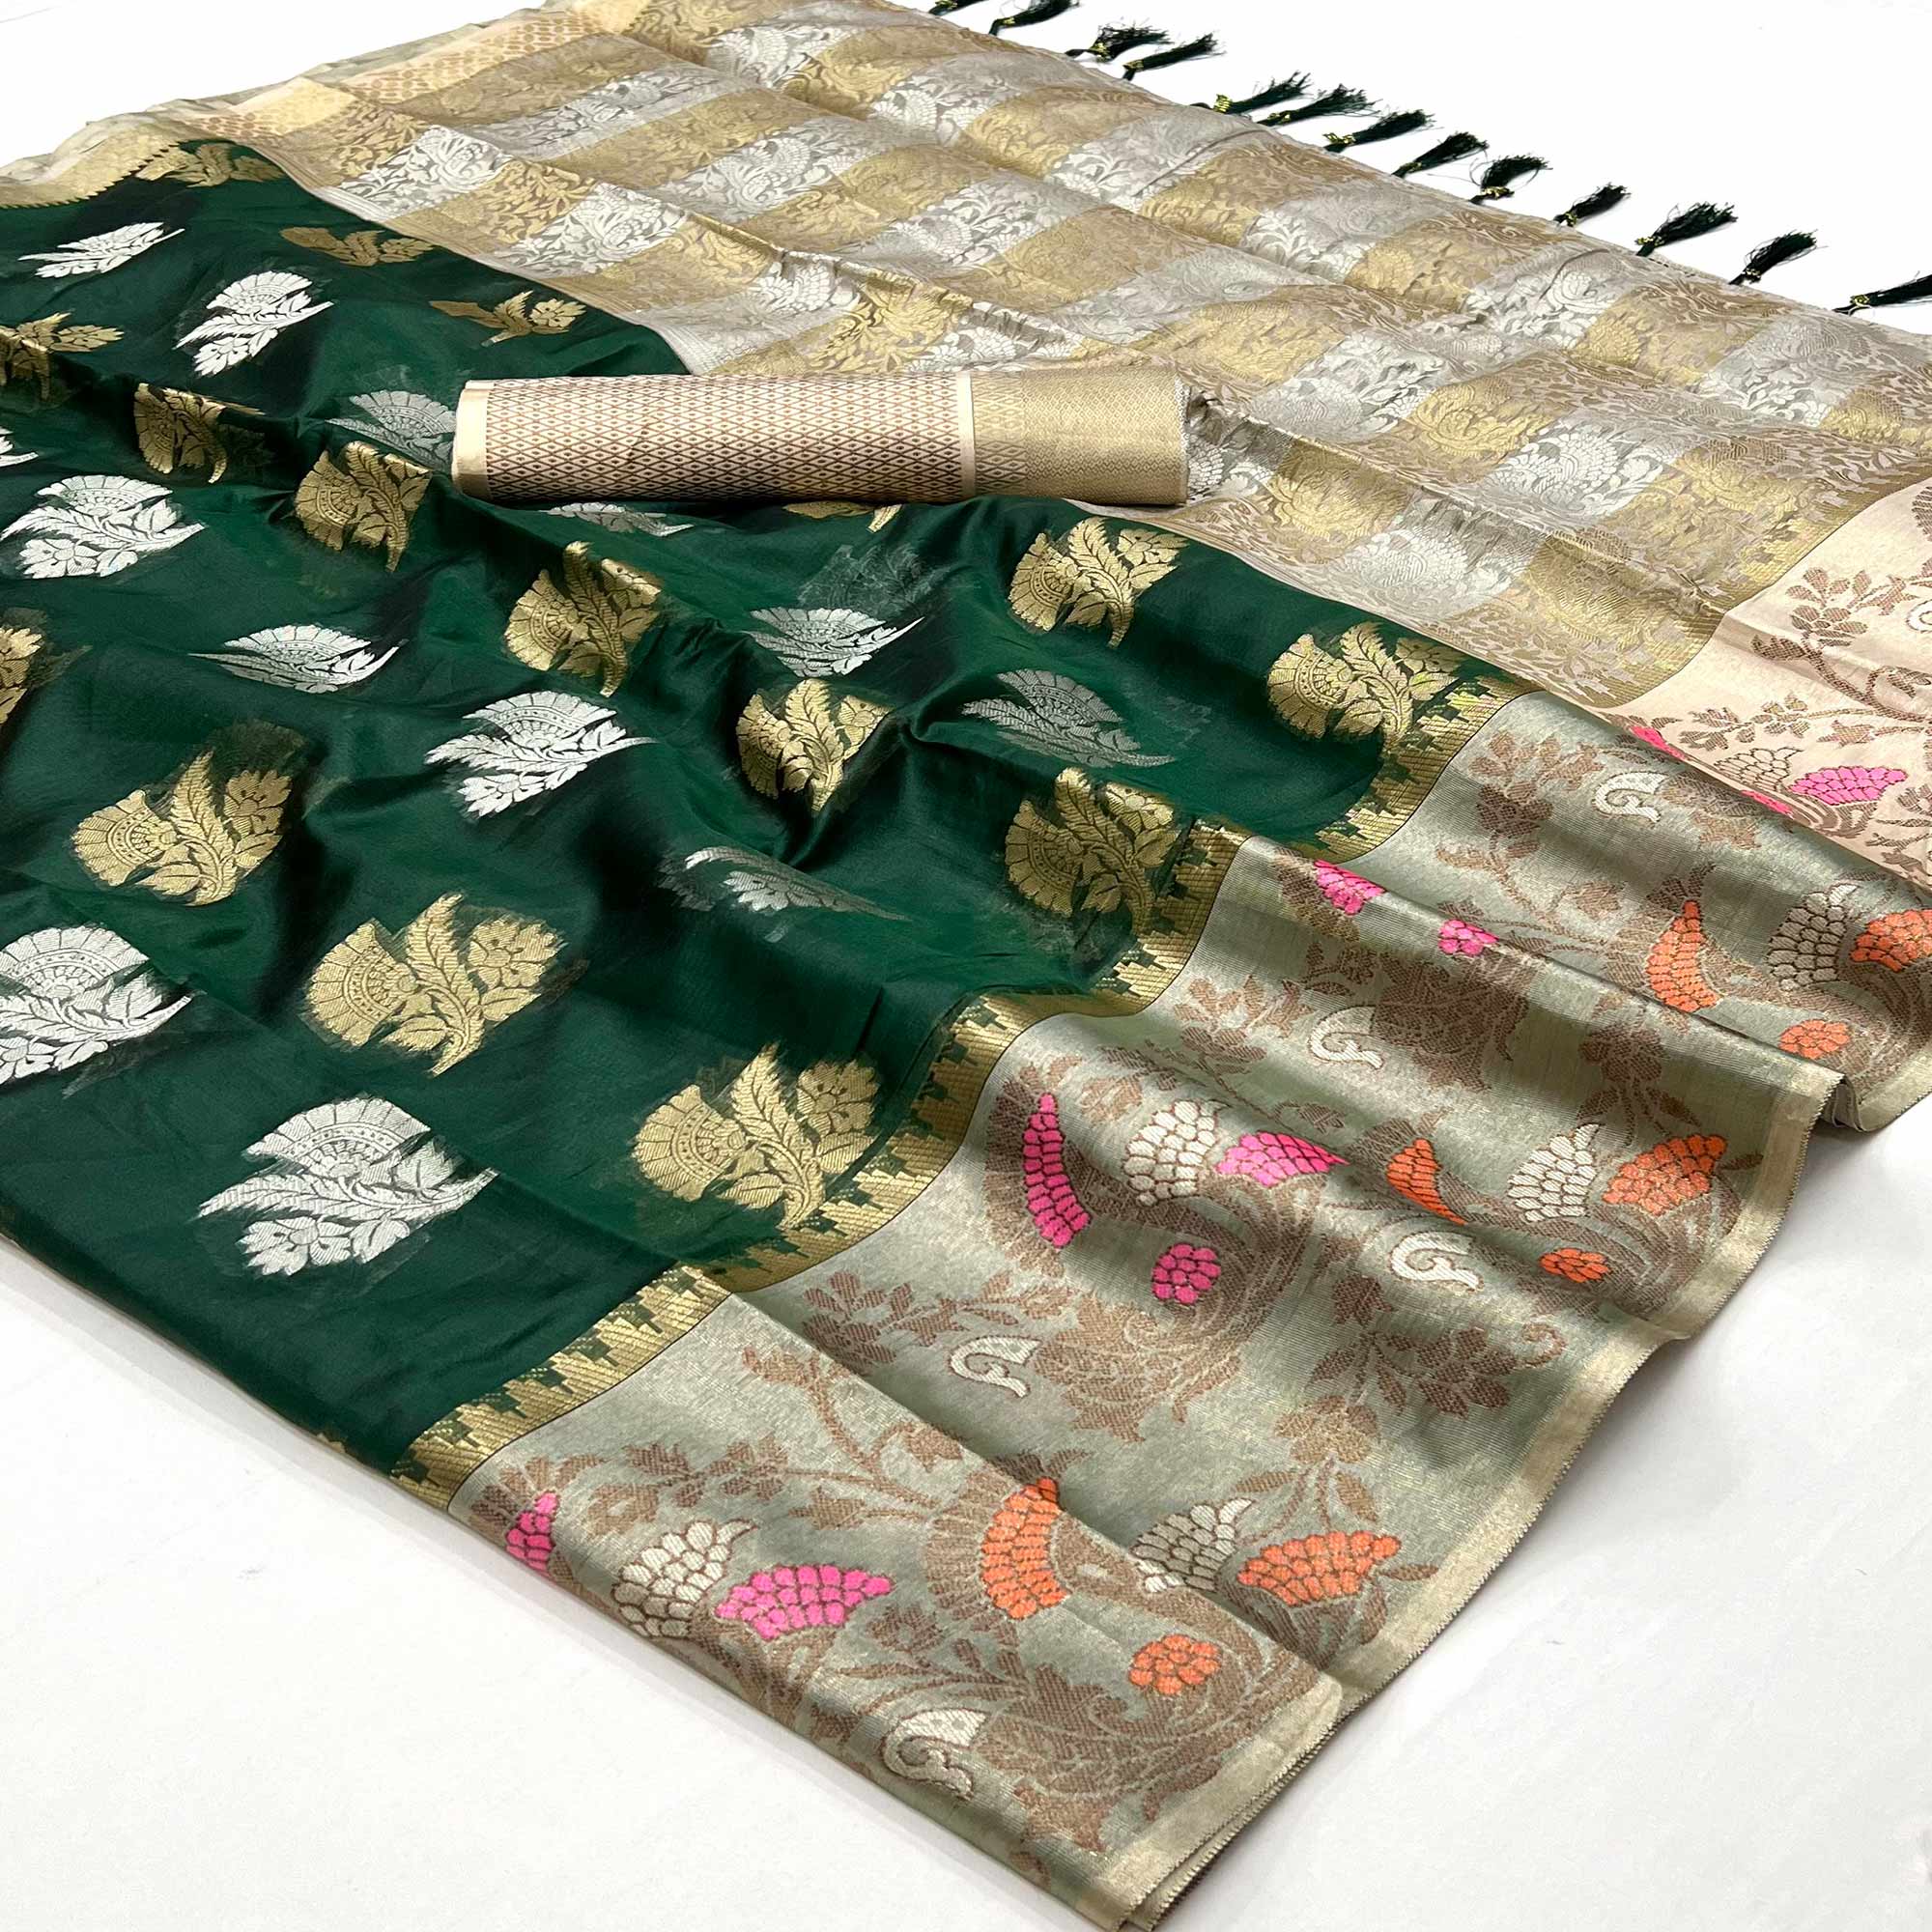 Bottle Green Floral Woven Organza Saree With Tassels